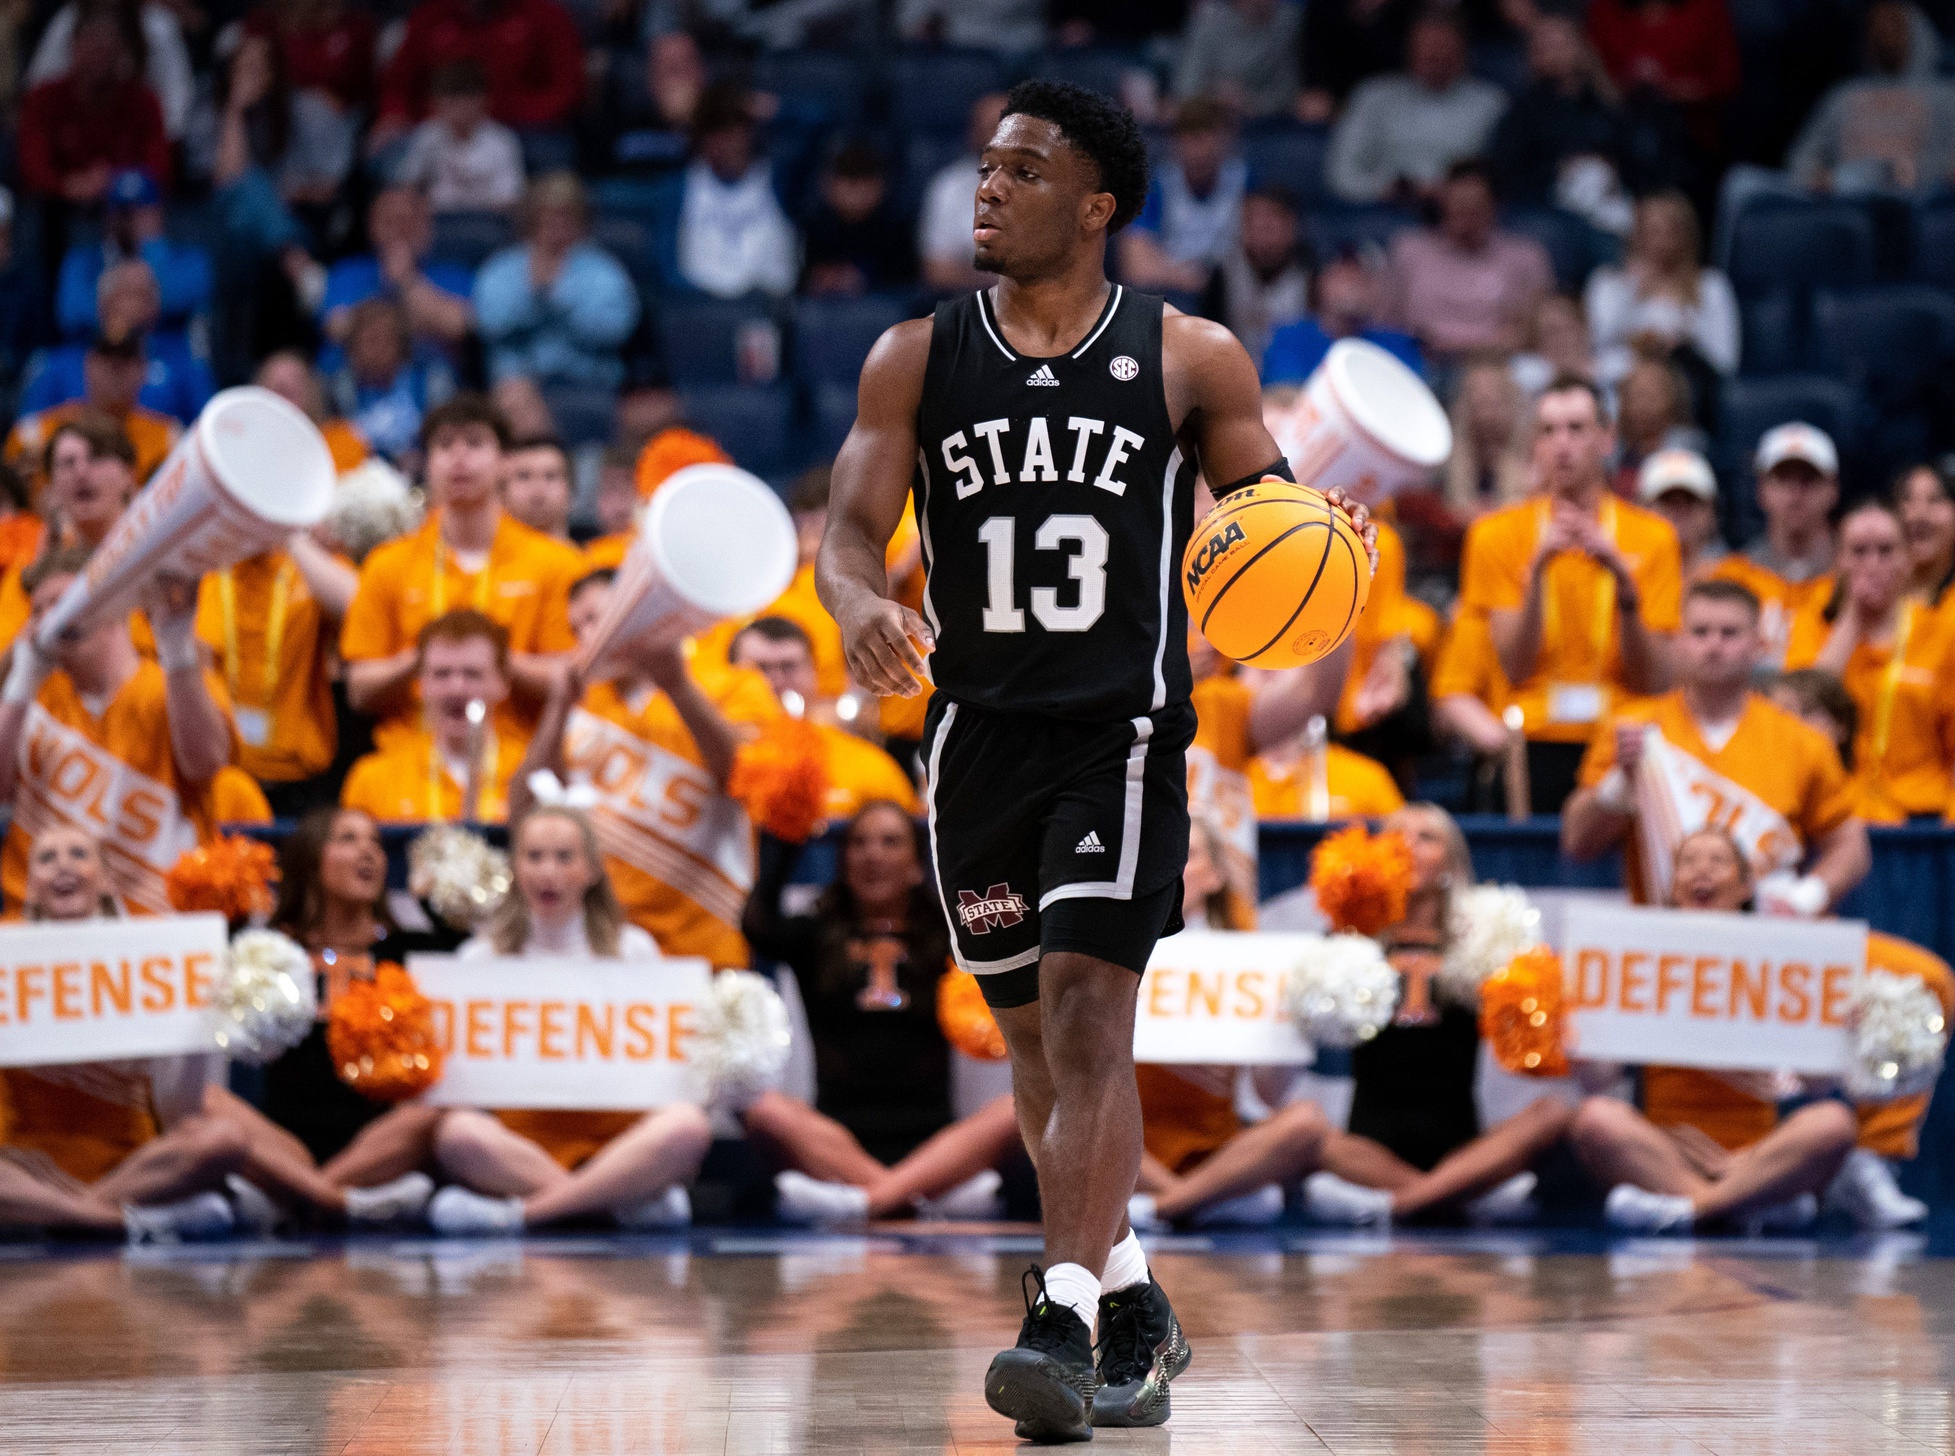 Mississippi State Bulldogs guard Josh Hubbard (13) brings the ball up the court against Tennessee during their SEC Men's Basketball Tournament quarterfinal game at Bridgestone Arena in Nashville